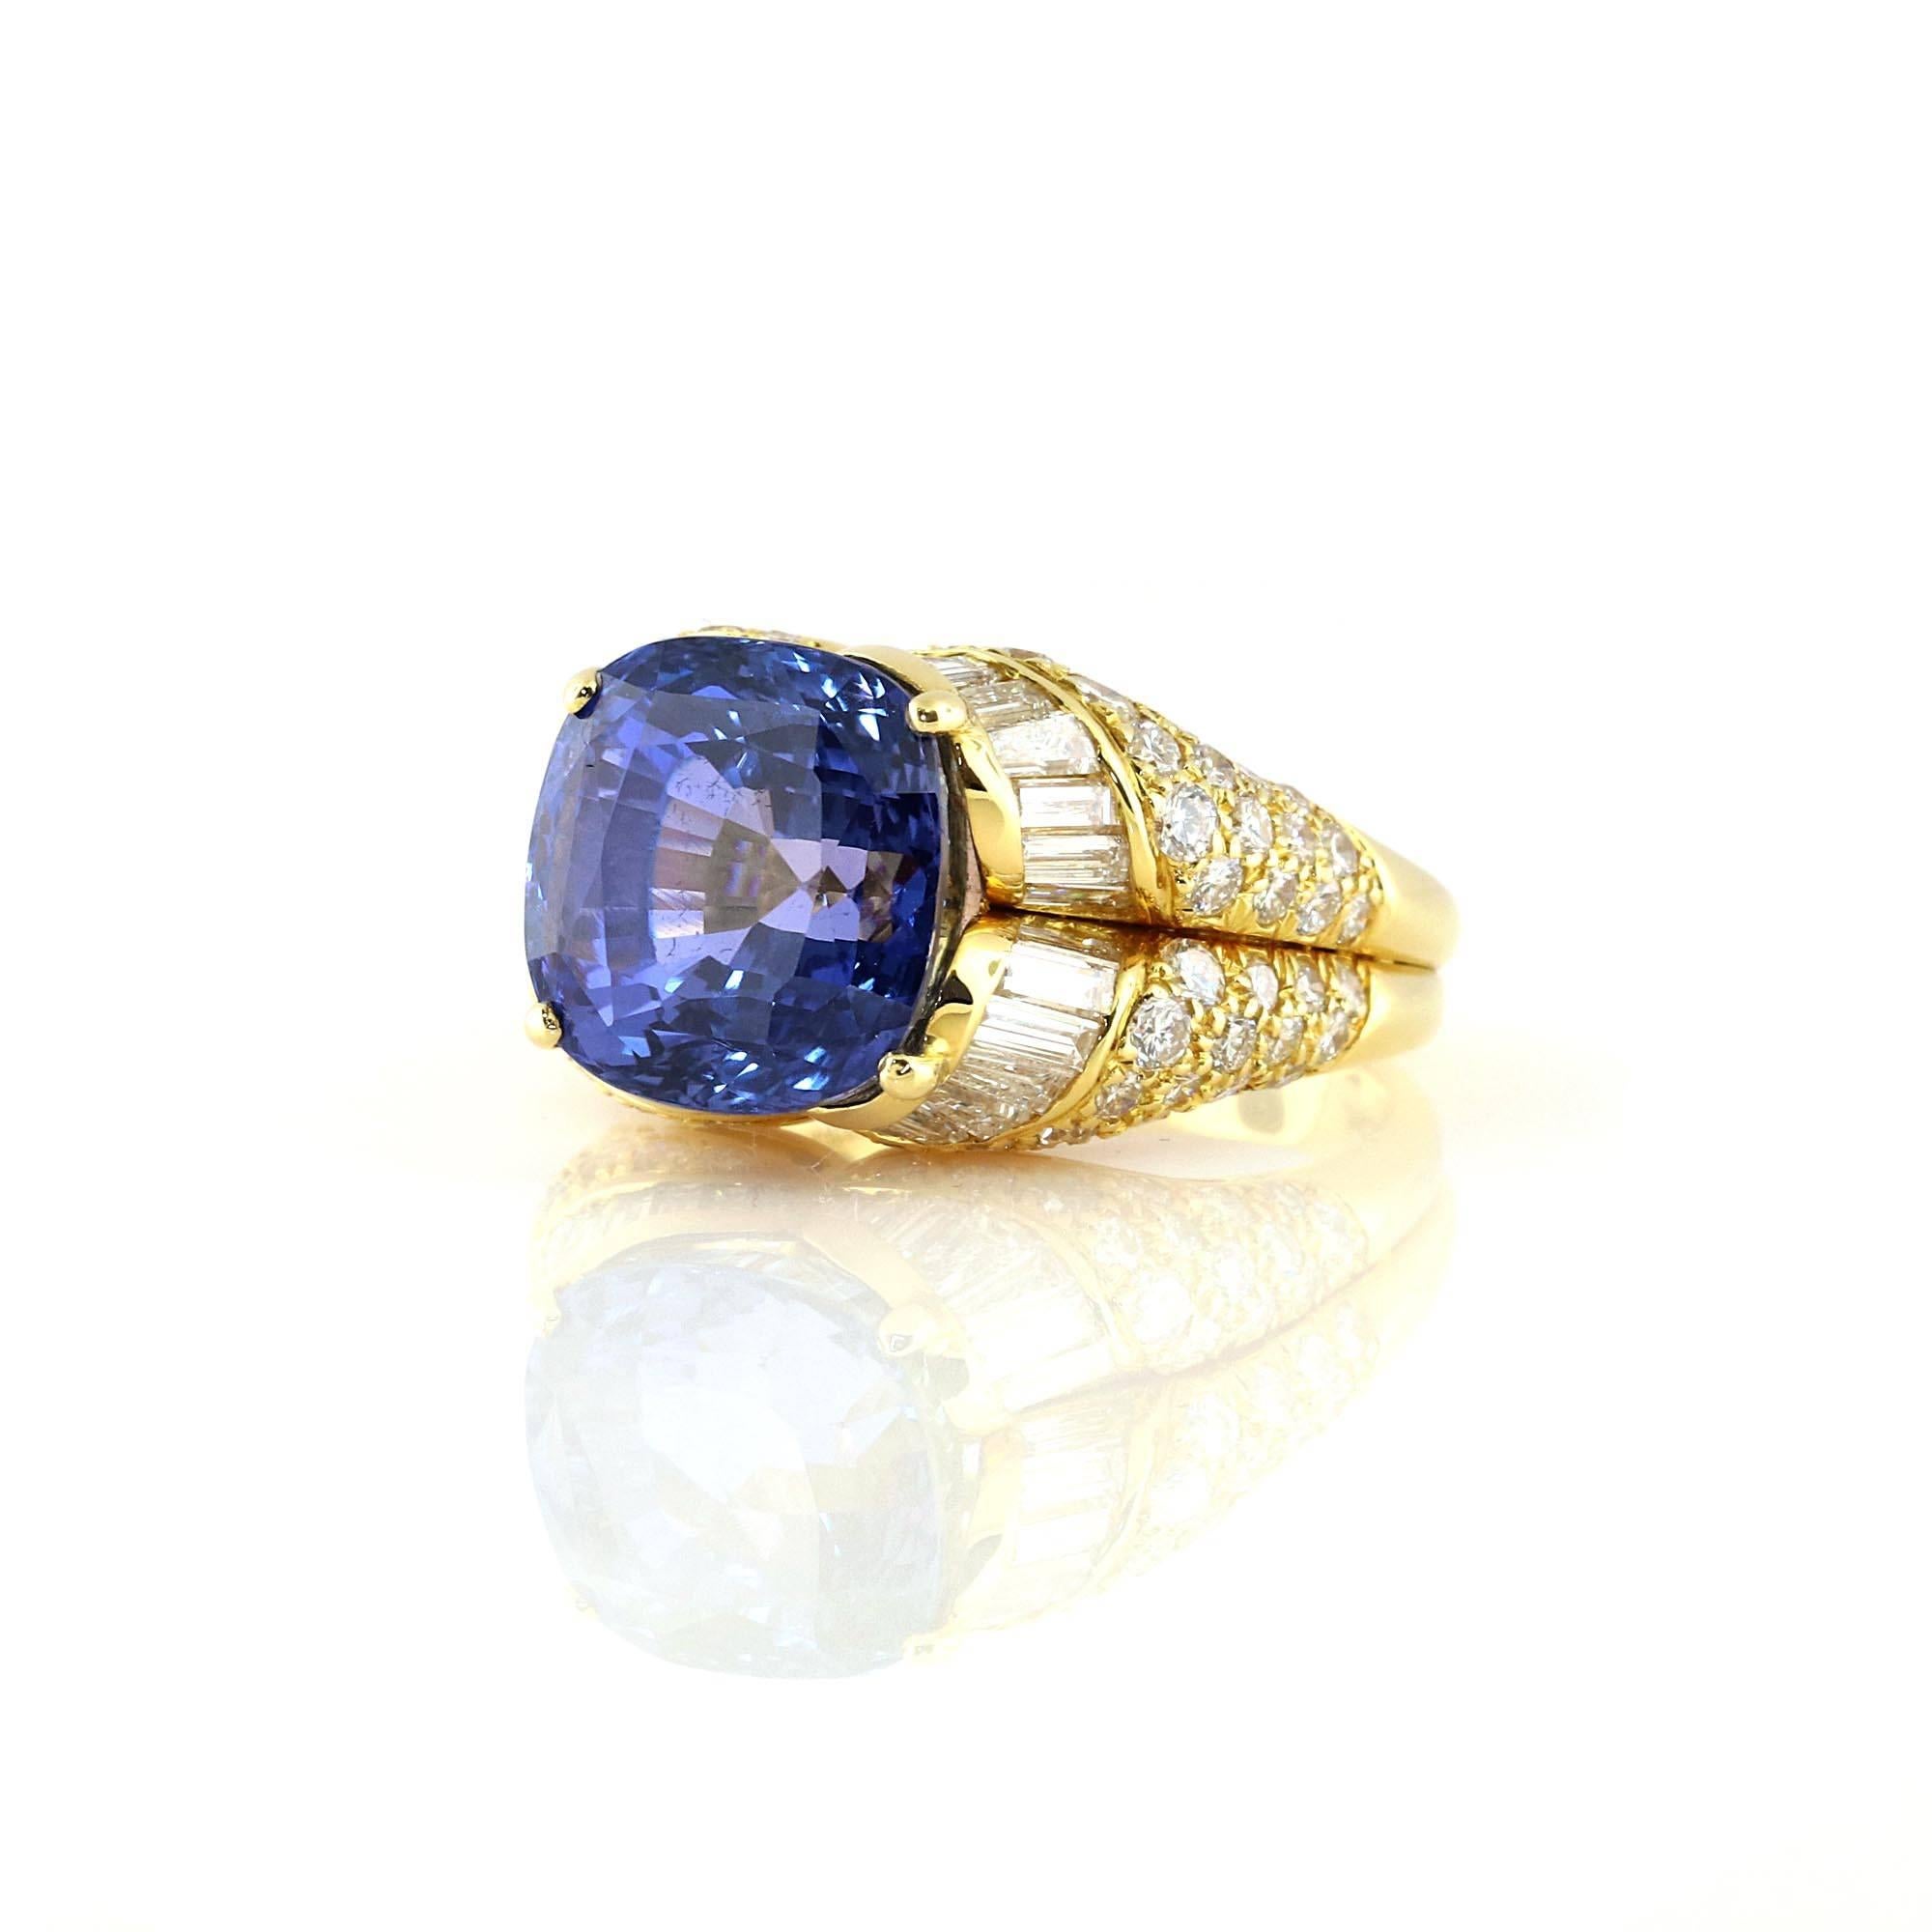 Excellent Bulgari Diamond and Sapphire ring. This center stone is a 14.13 carat Sri Lanka sapphire. The stone has a GIA certificate (can provide upon request) stating the stone has no indications of heat treatment. The stone measures 12.31 x 12.15 x